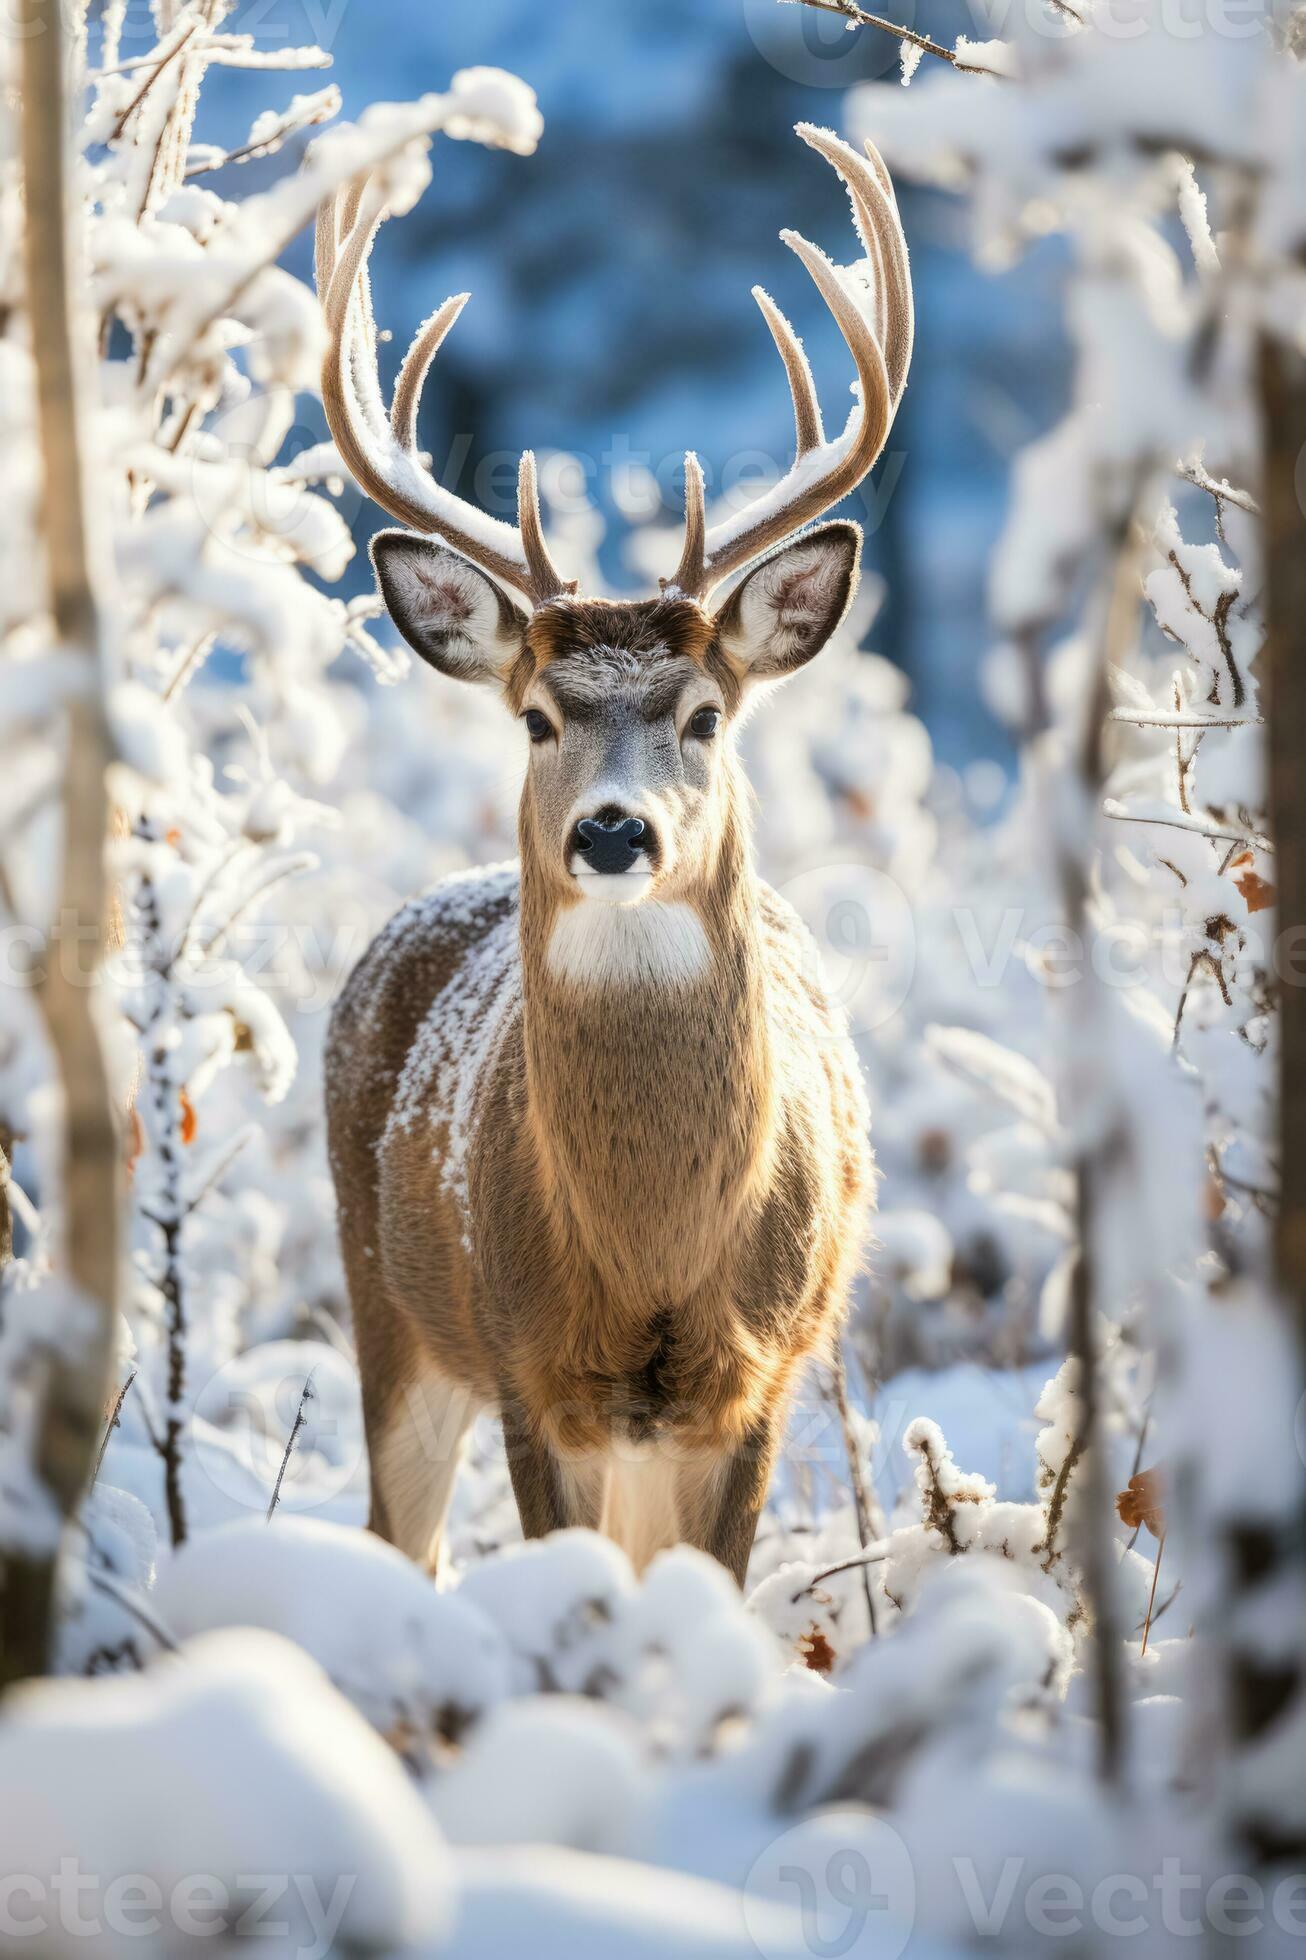 Deer foraging in a snow-covered wilderness depicting wildlife